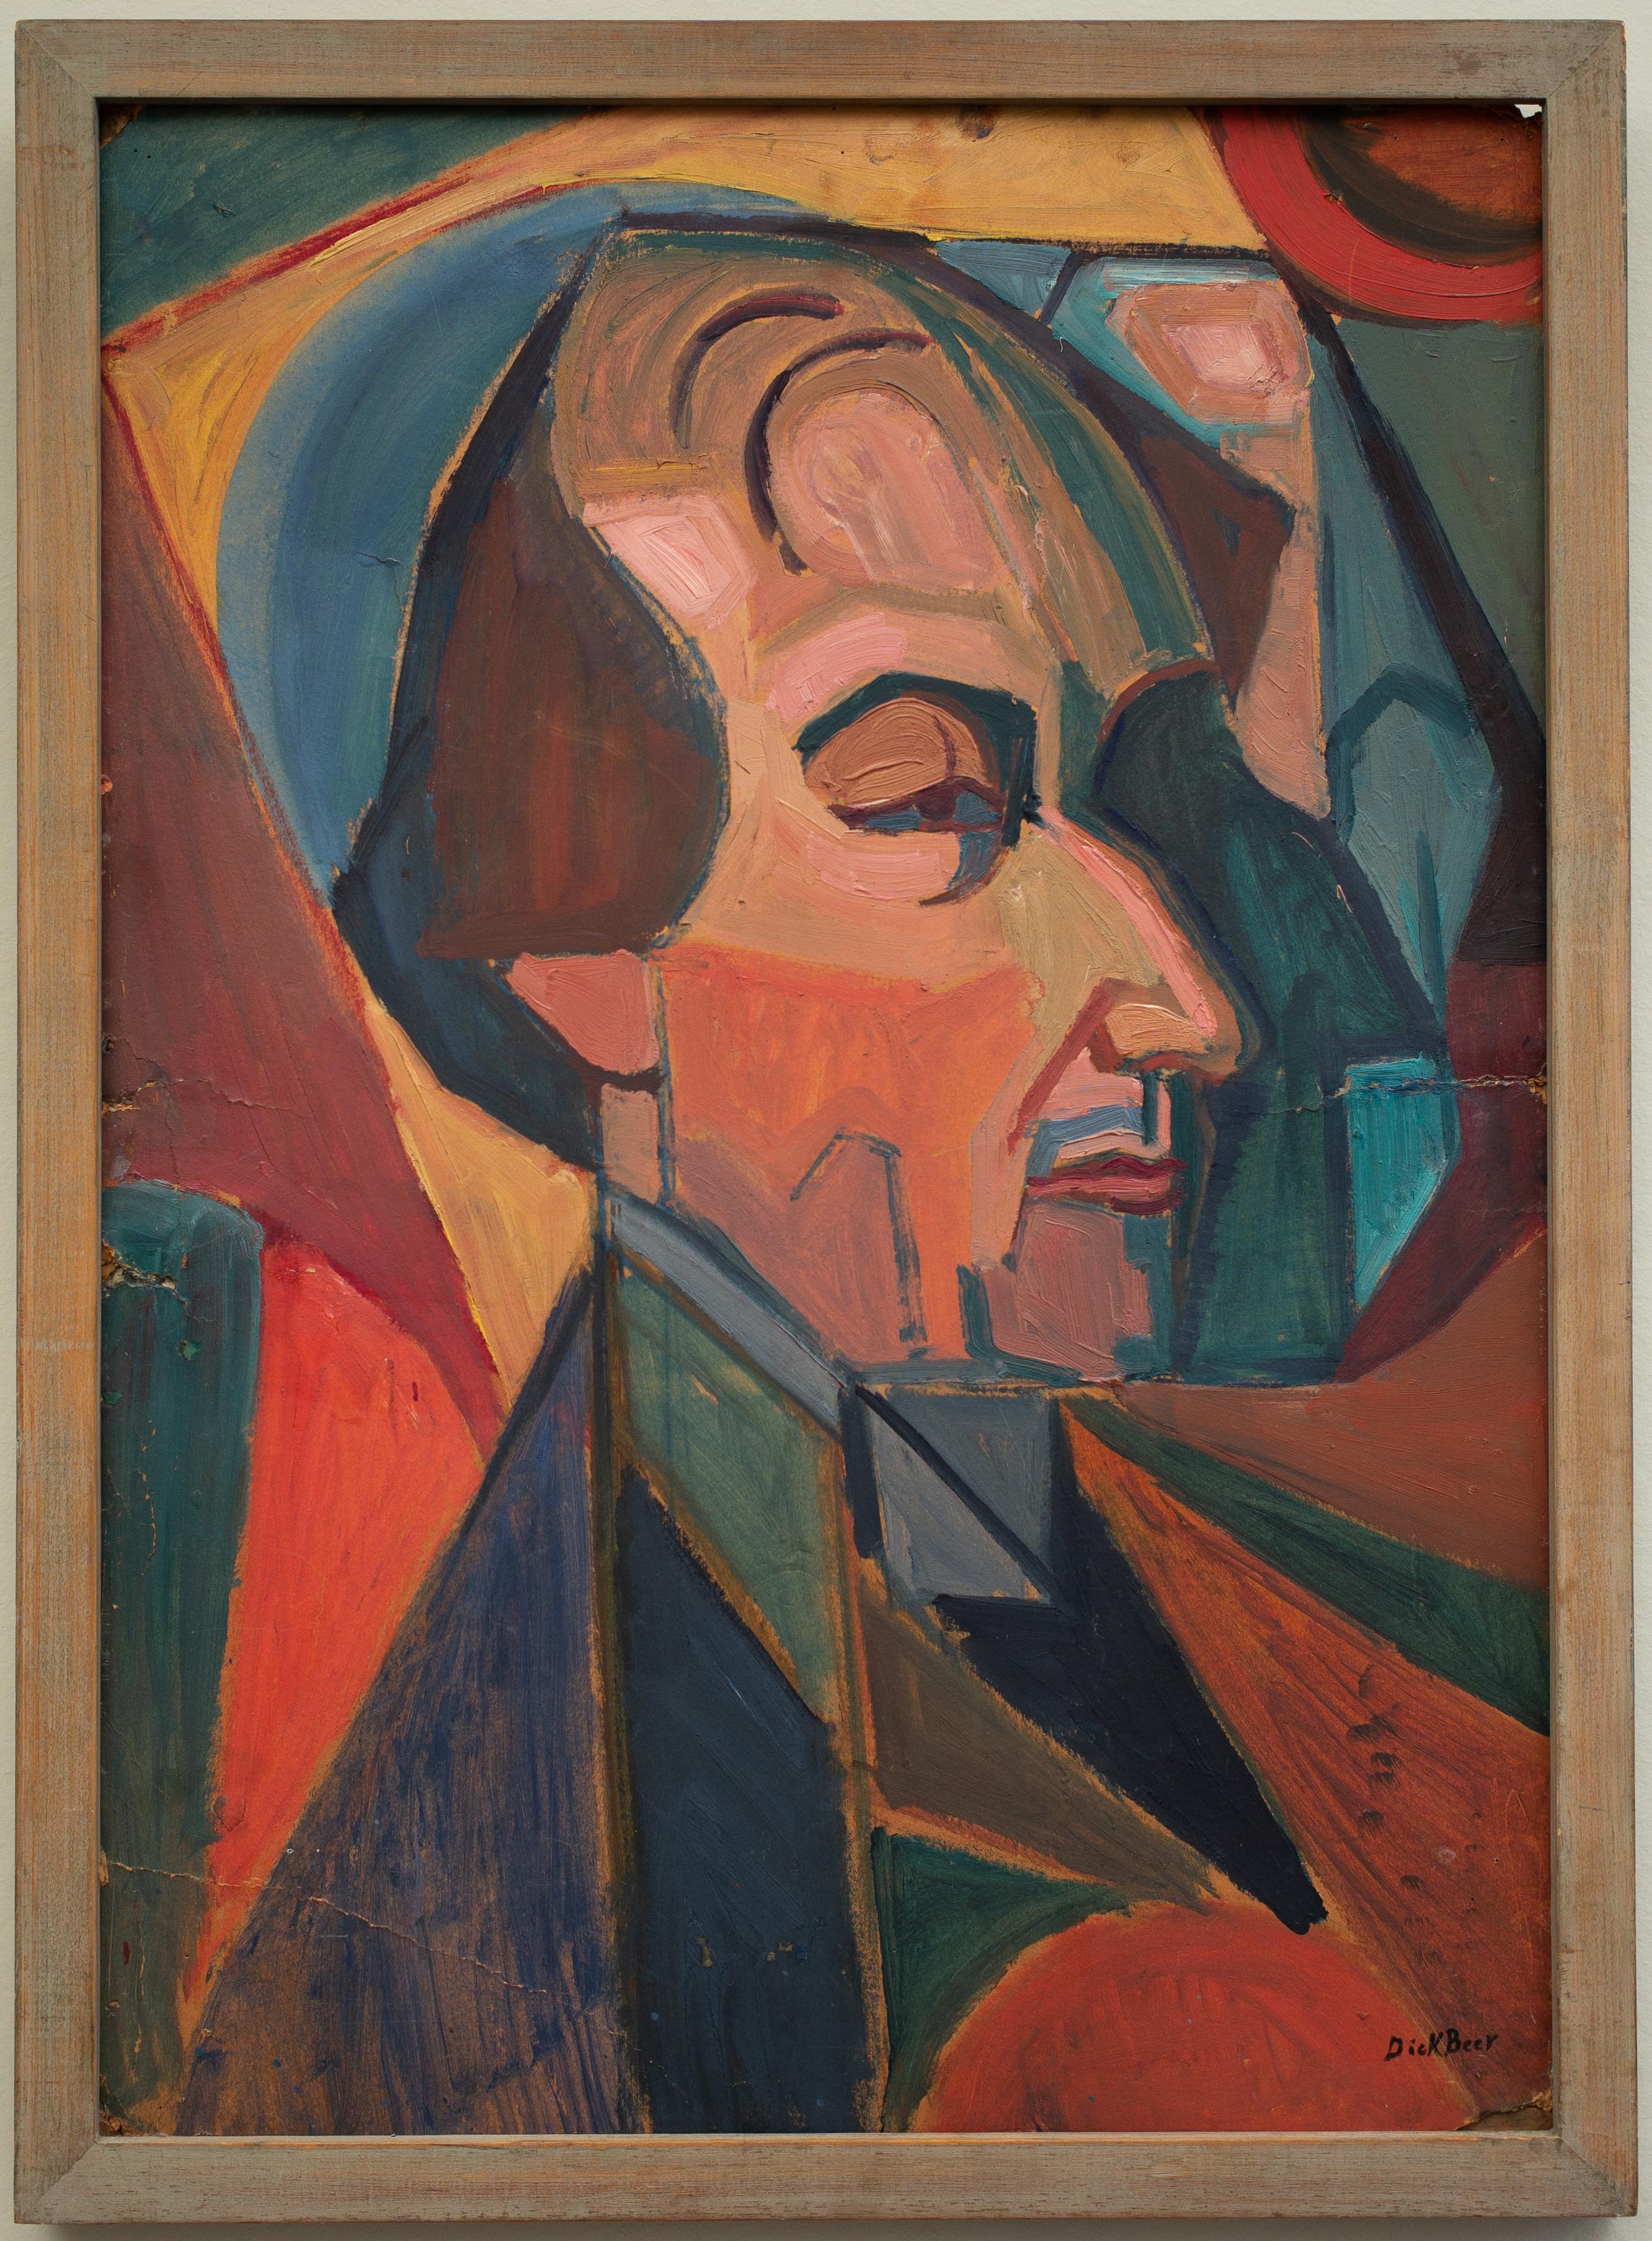 Cubist Painting from 1918-19, Portrait of Dr Mens III - Black Abstract Painting by Dick Beer